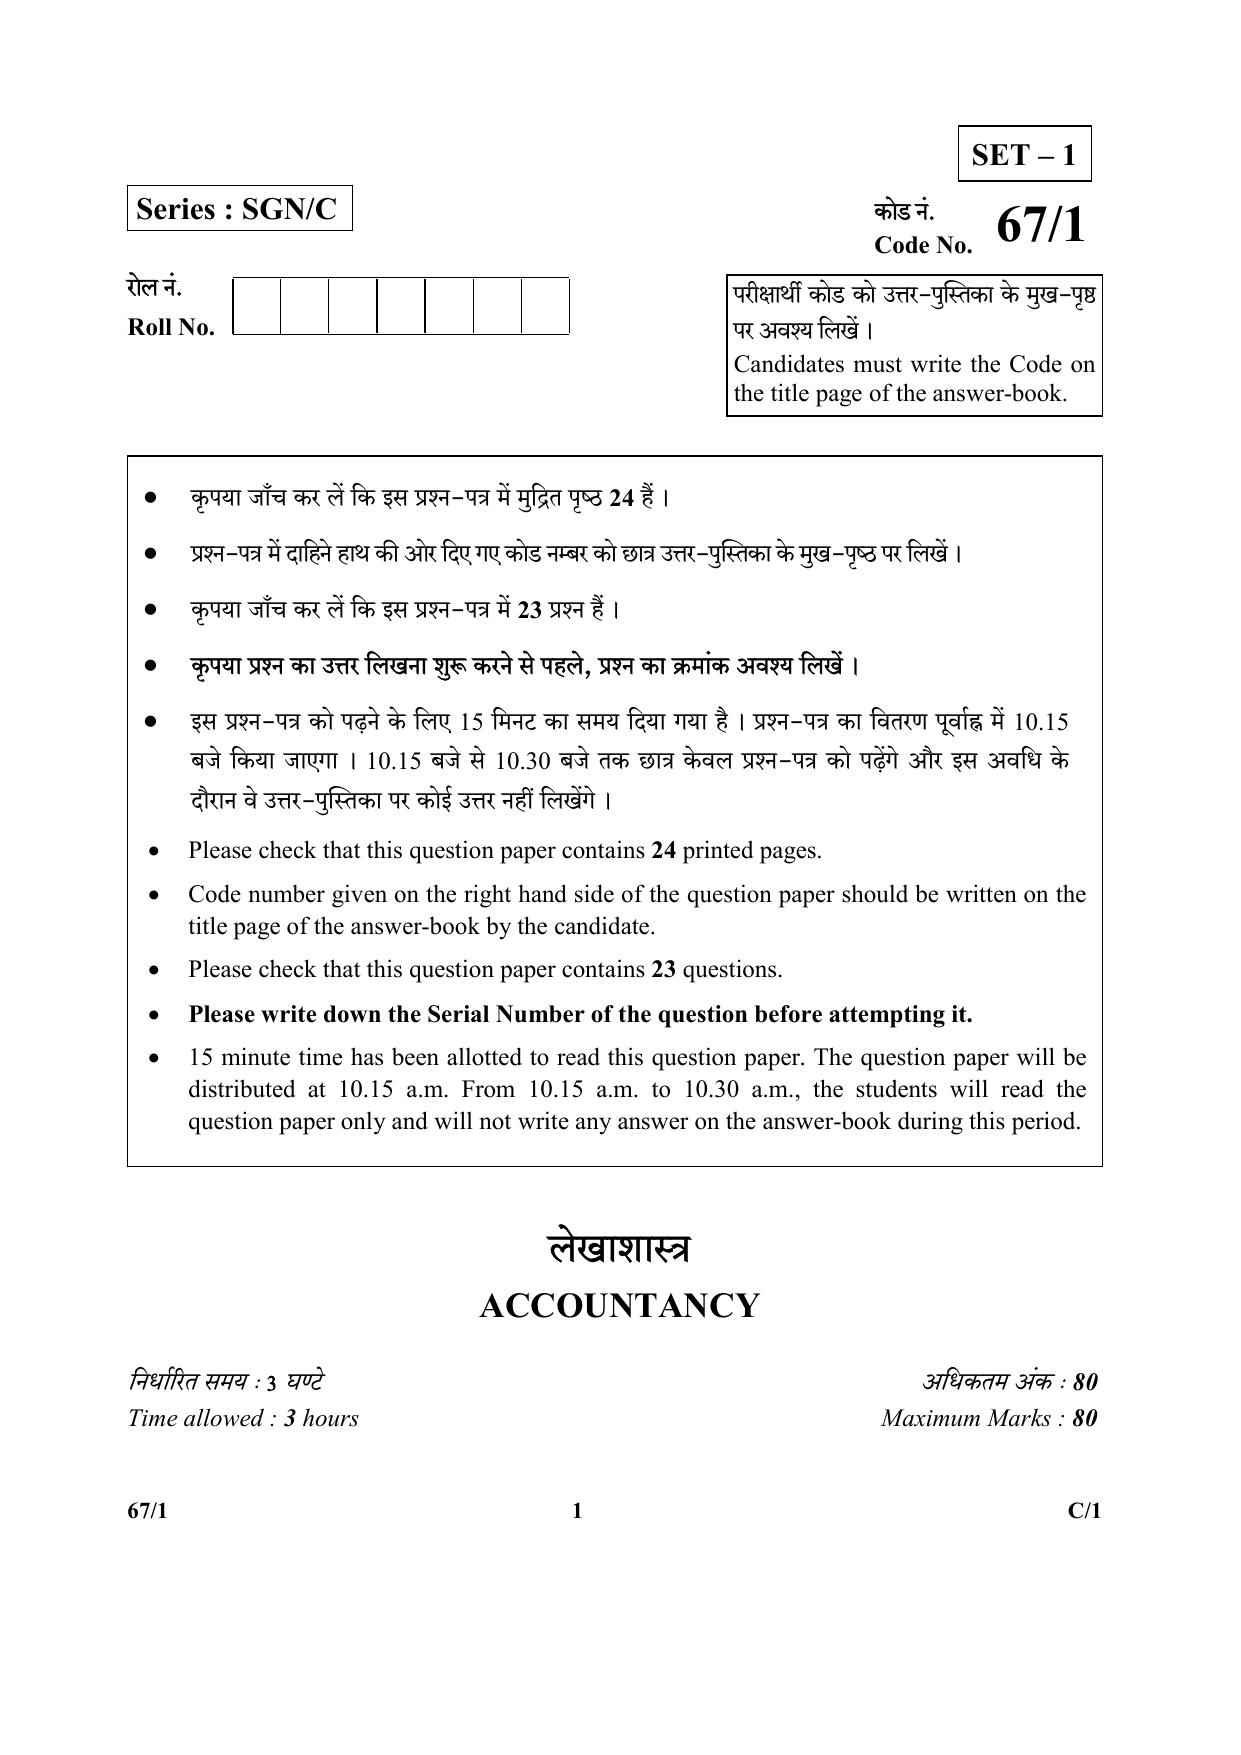 CBSE Class 12 67-1  (Accountancy) 2018 Compartment Question Paper - Page 1